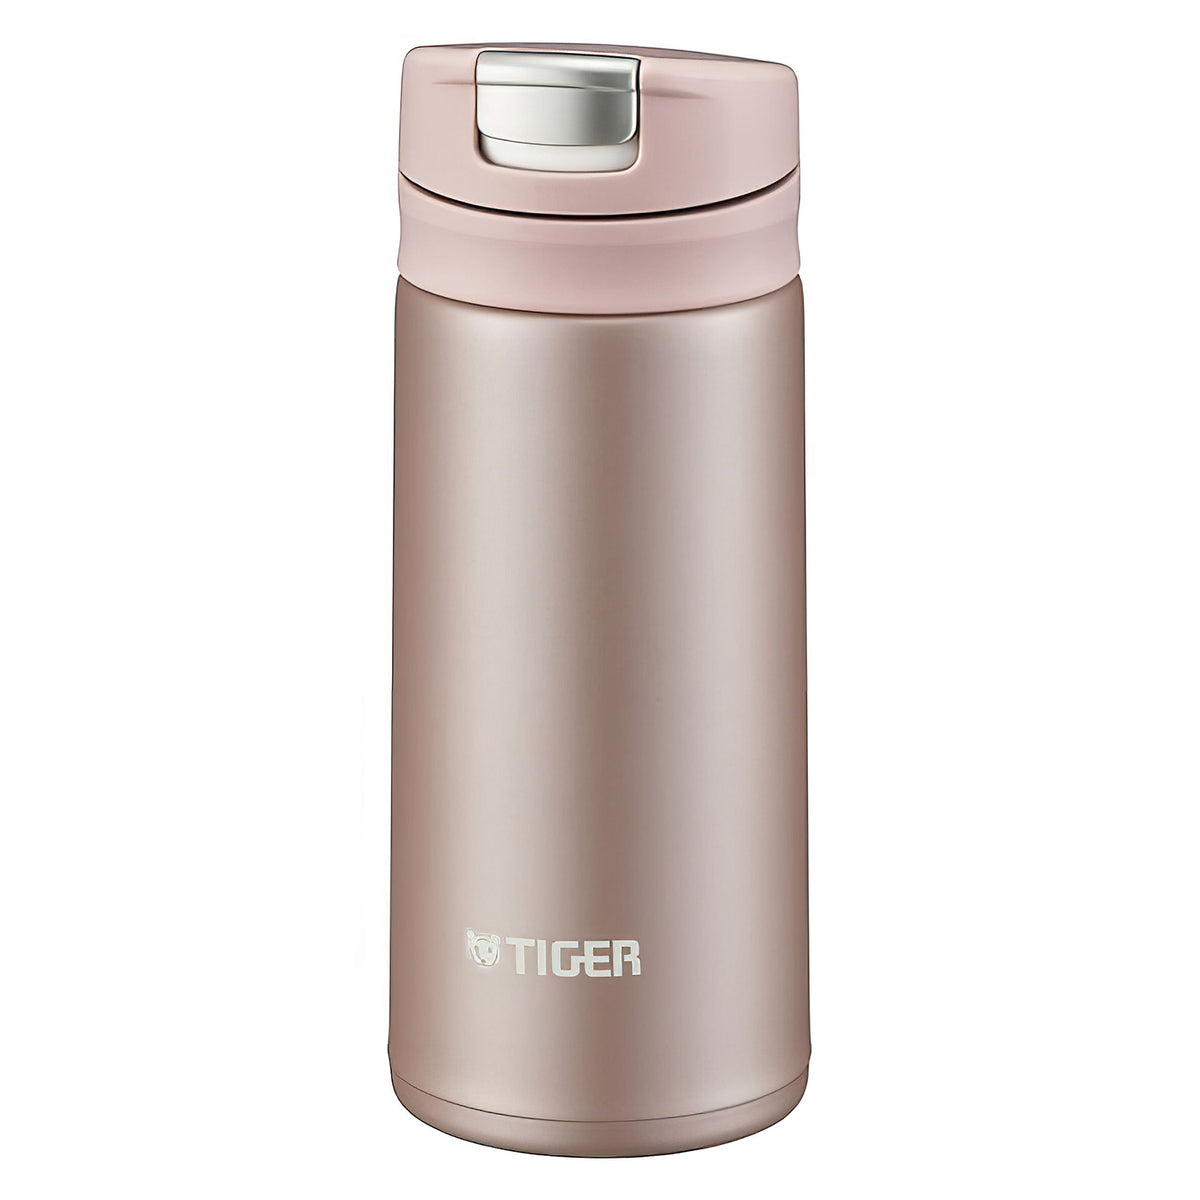 Tiger thermos bottle warming lunch box stainless steel lunch jar bowl cup